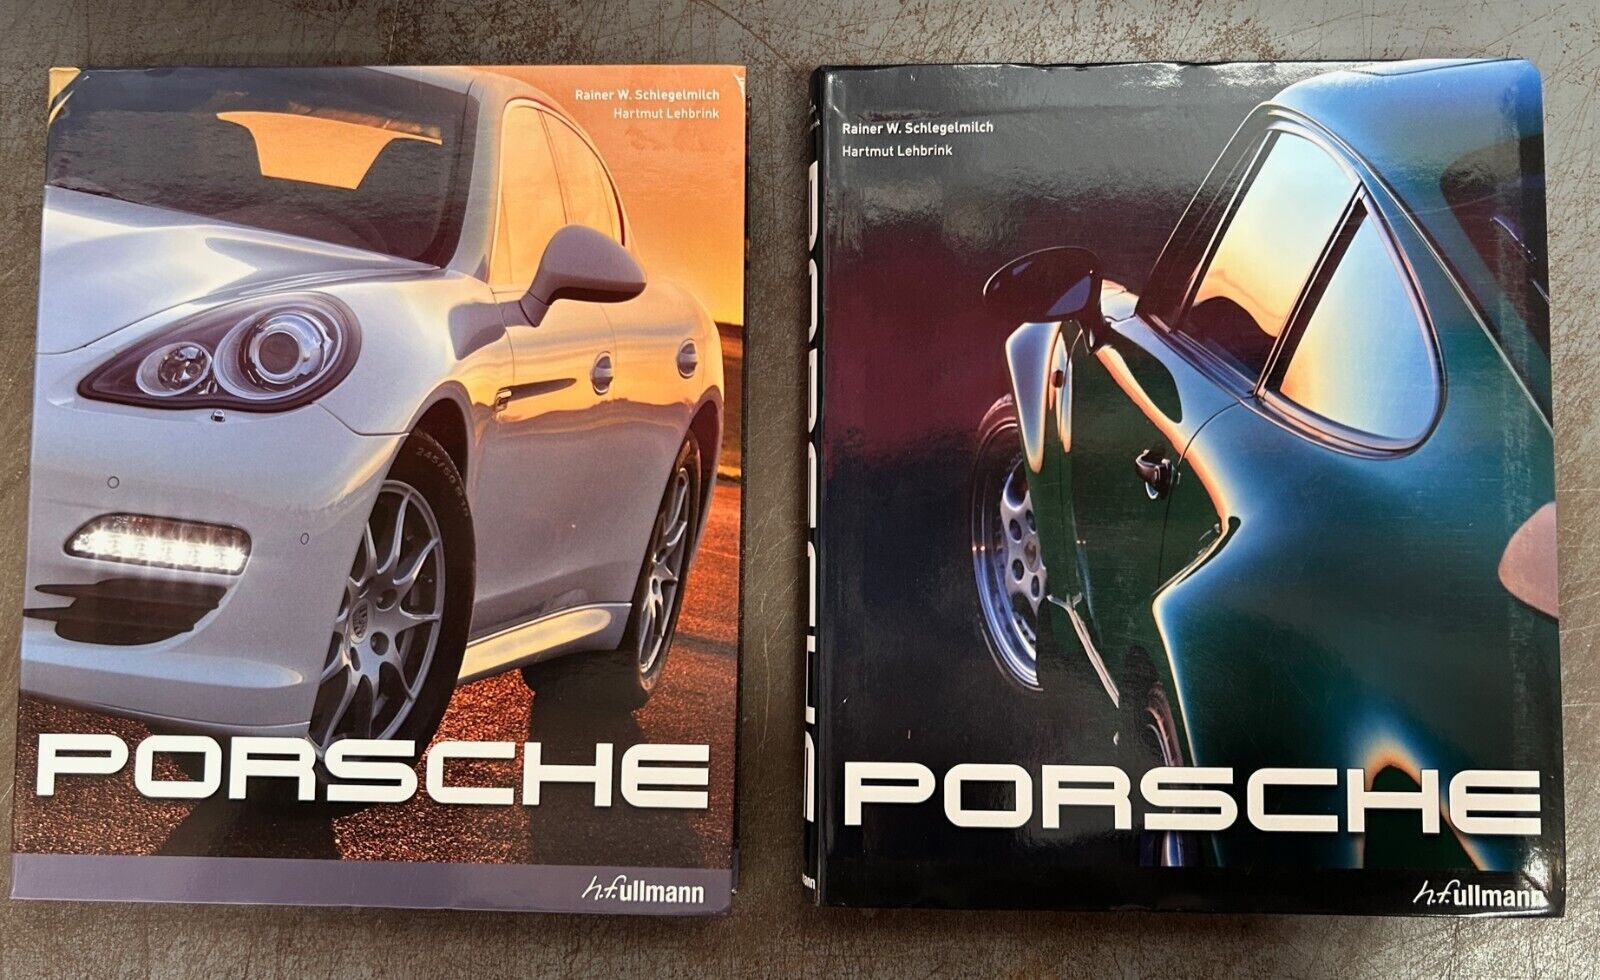 PORSCHE BOOKS BY RAINER W SCHTEGELMILCH  2 EDITIONS FROM 2008  / 2010 398 PAGES